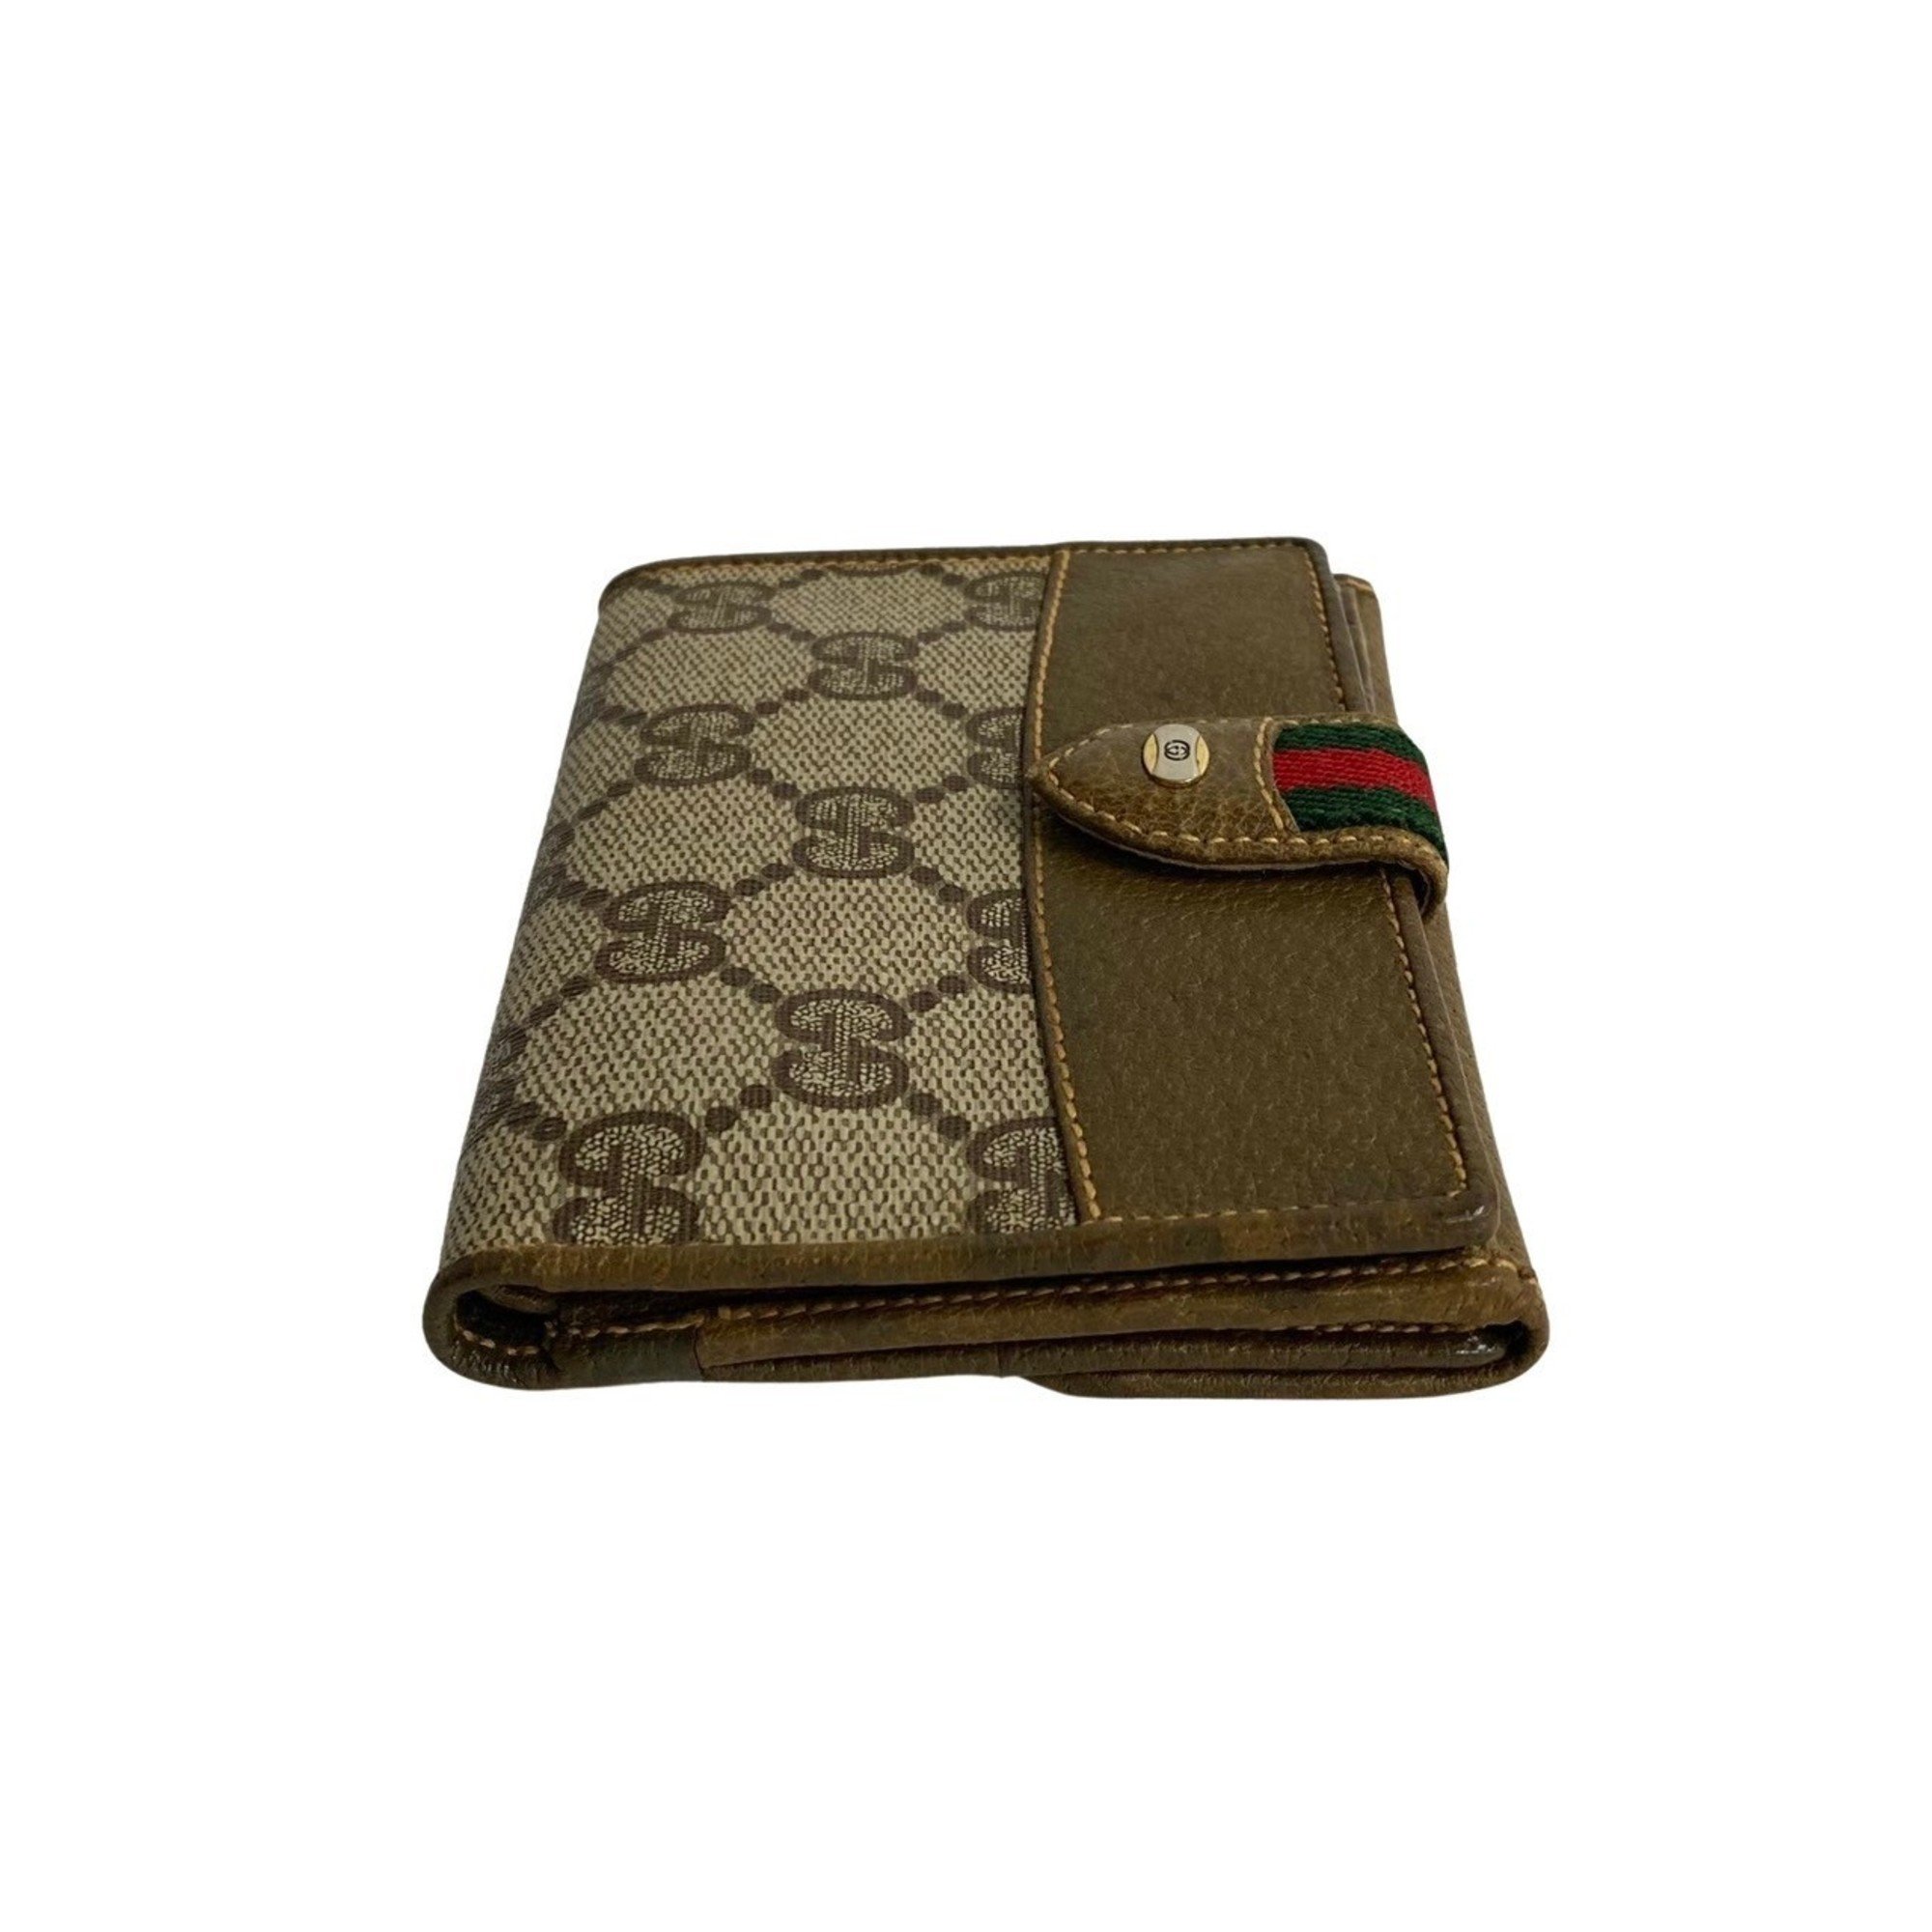 GUCCI Old Gucci Sherry Line GG Leather Bifold Wallet Brown 14393